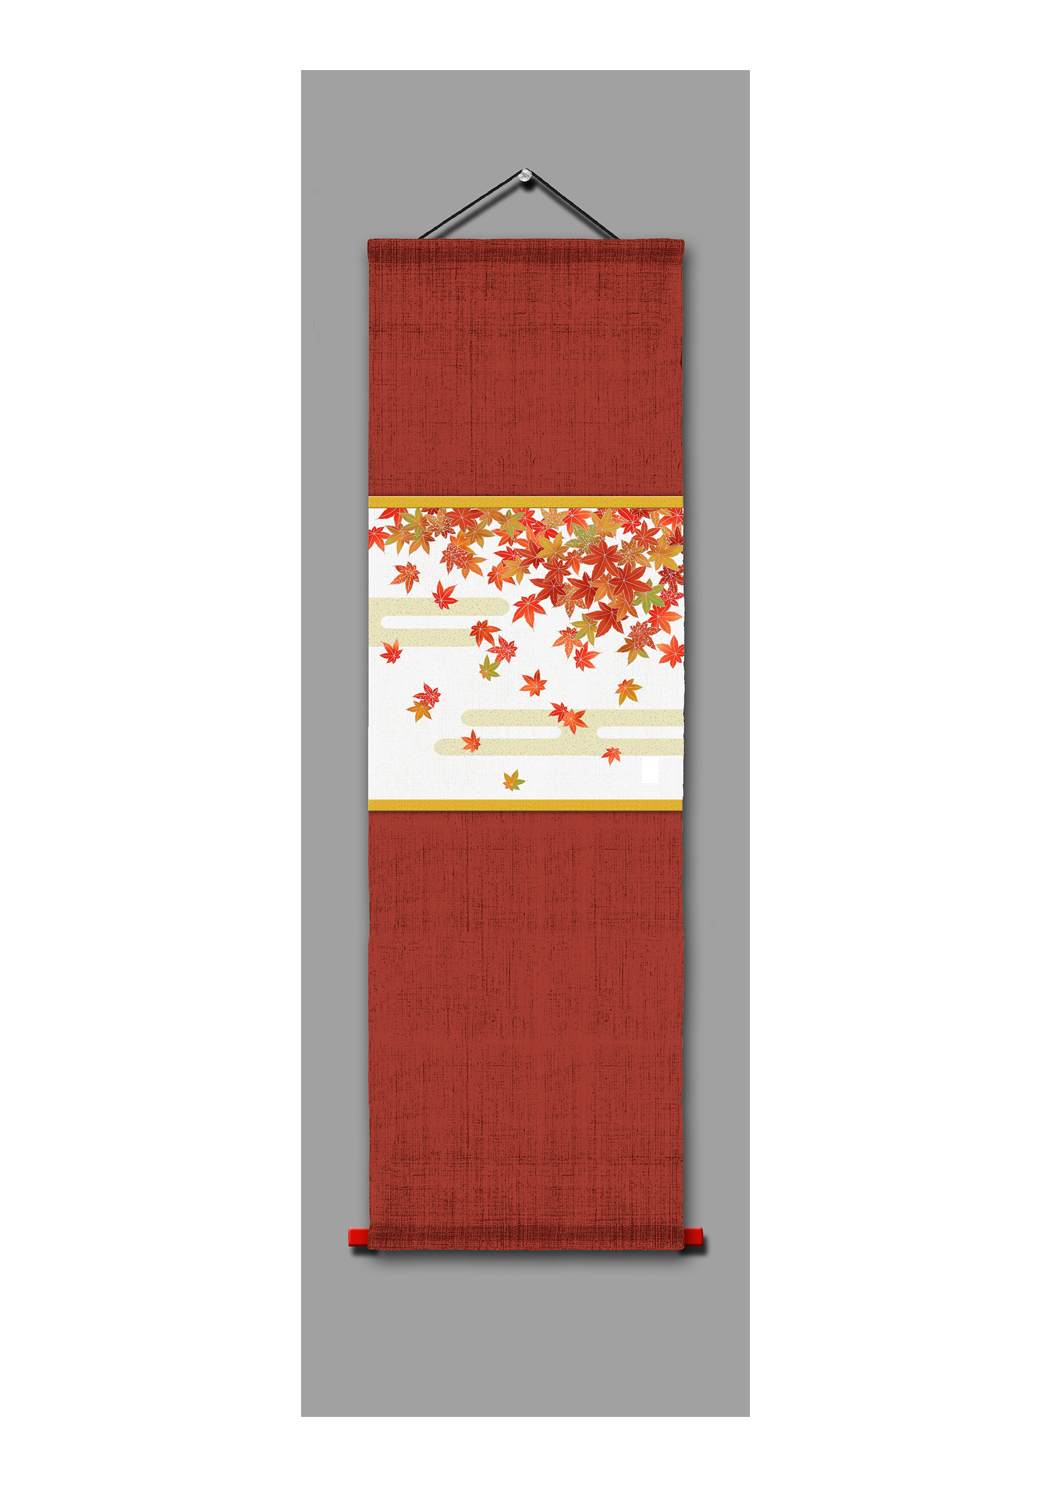 morning glory Interior tapestry floral